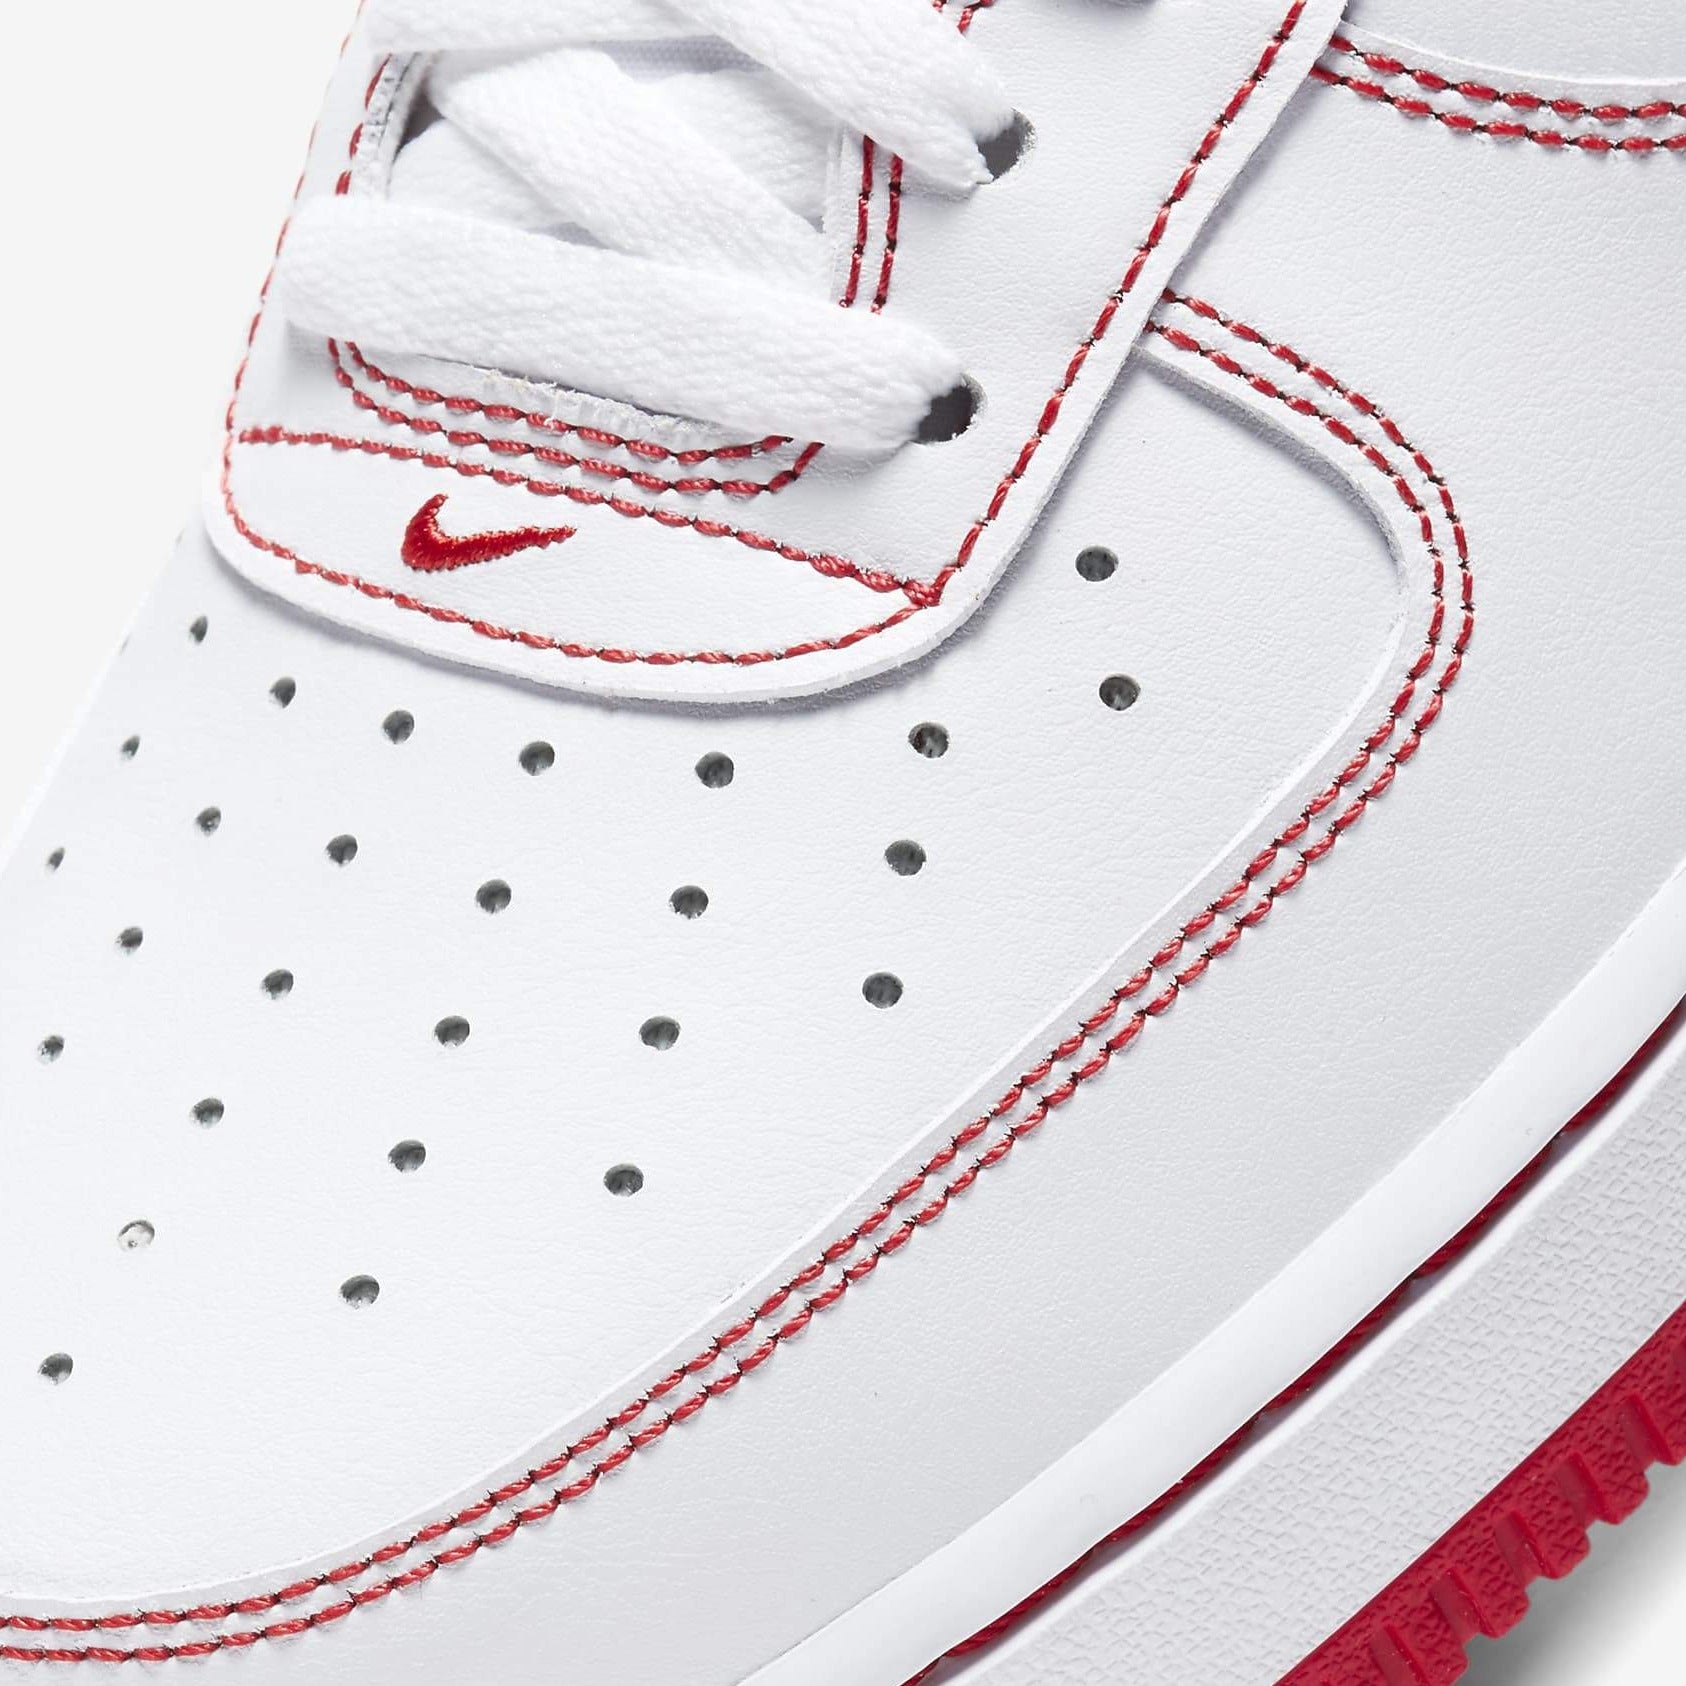 Nike Men's Air Force 1 07 Contrast Stitch White University Red